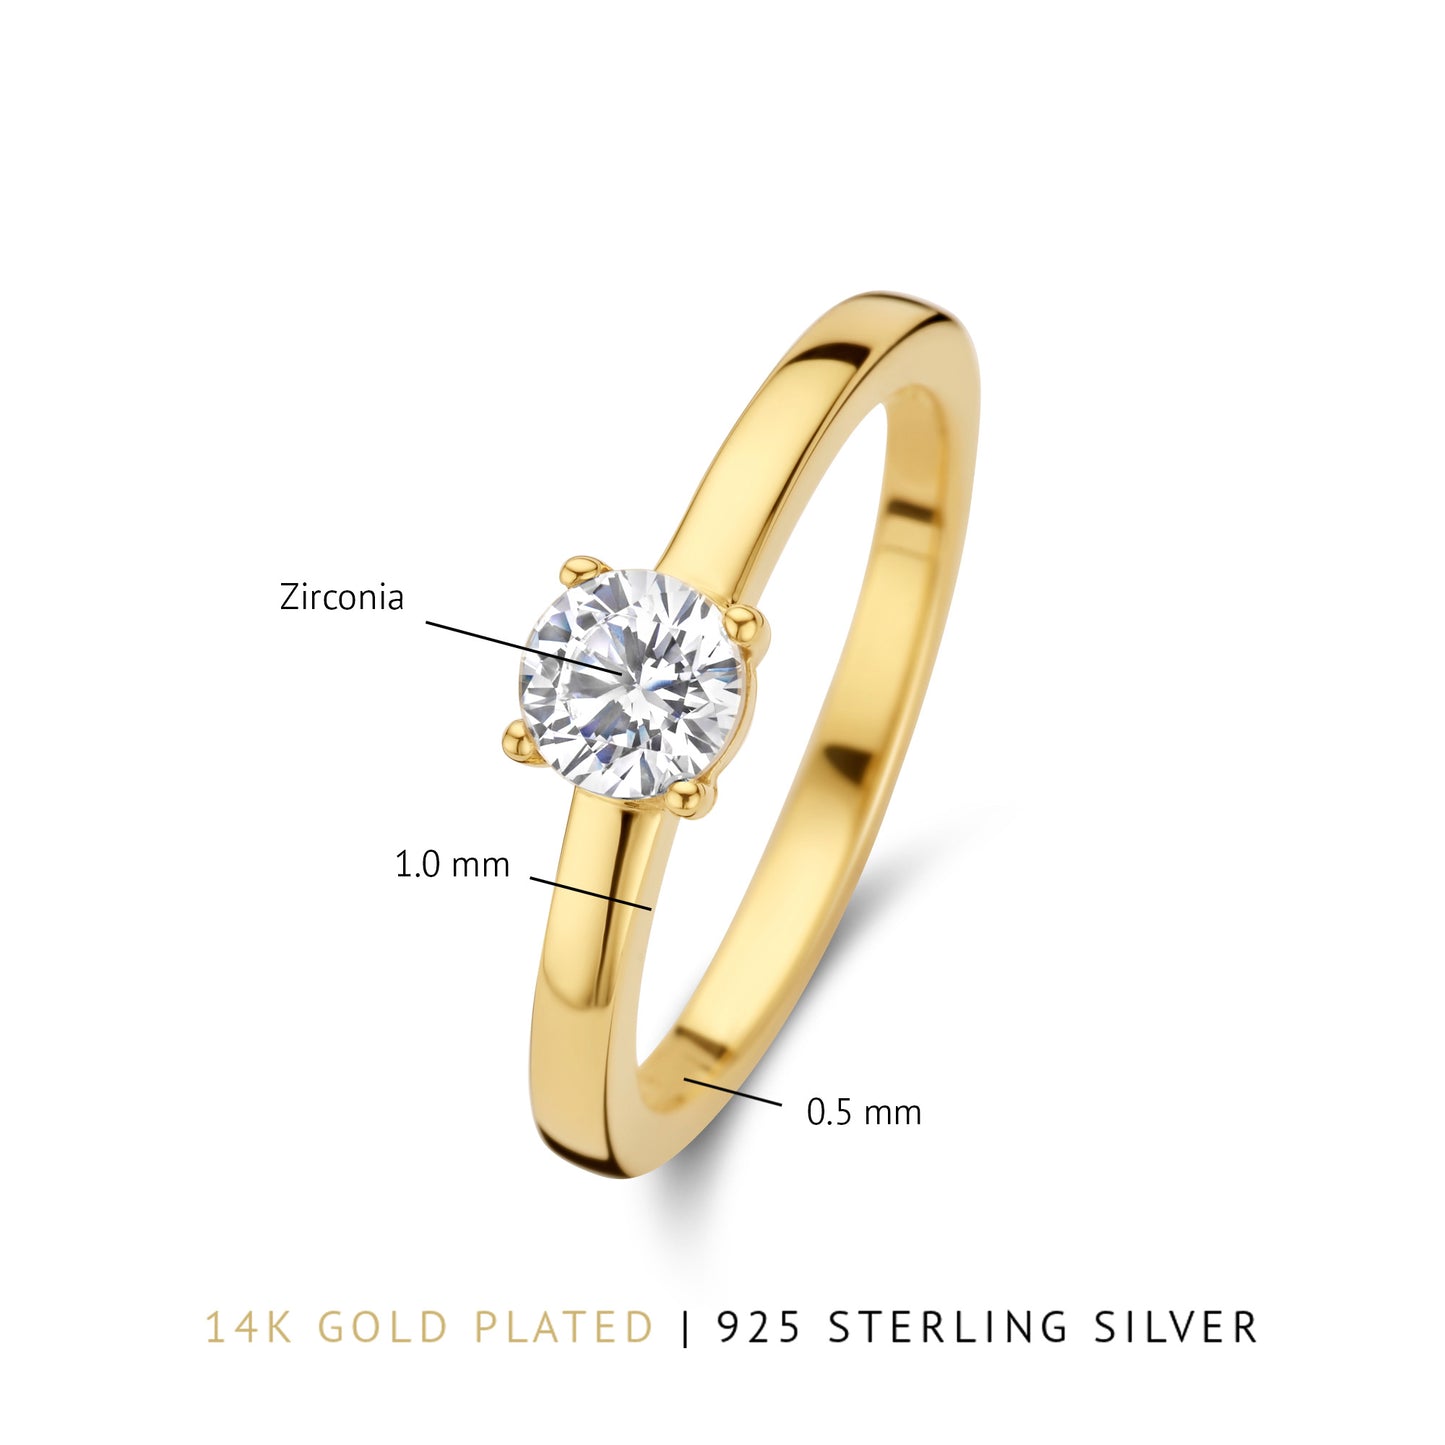 Ponte Vecchio Sofia 925 sterling silver gold plated ring with zirconia stone